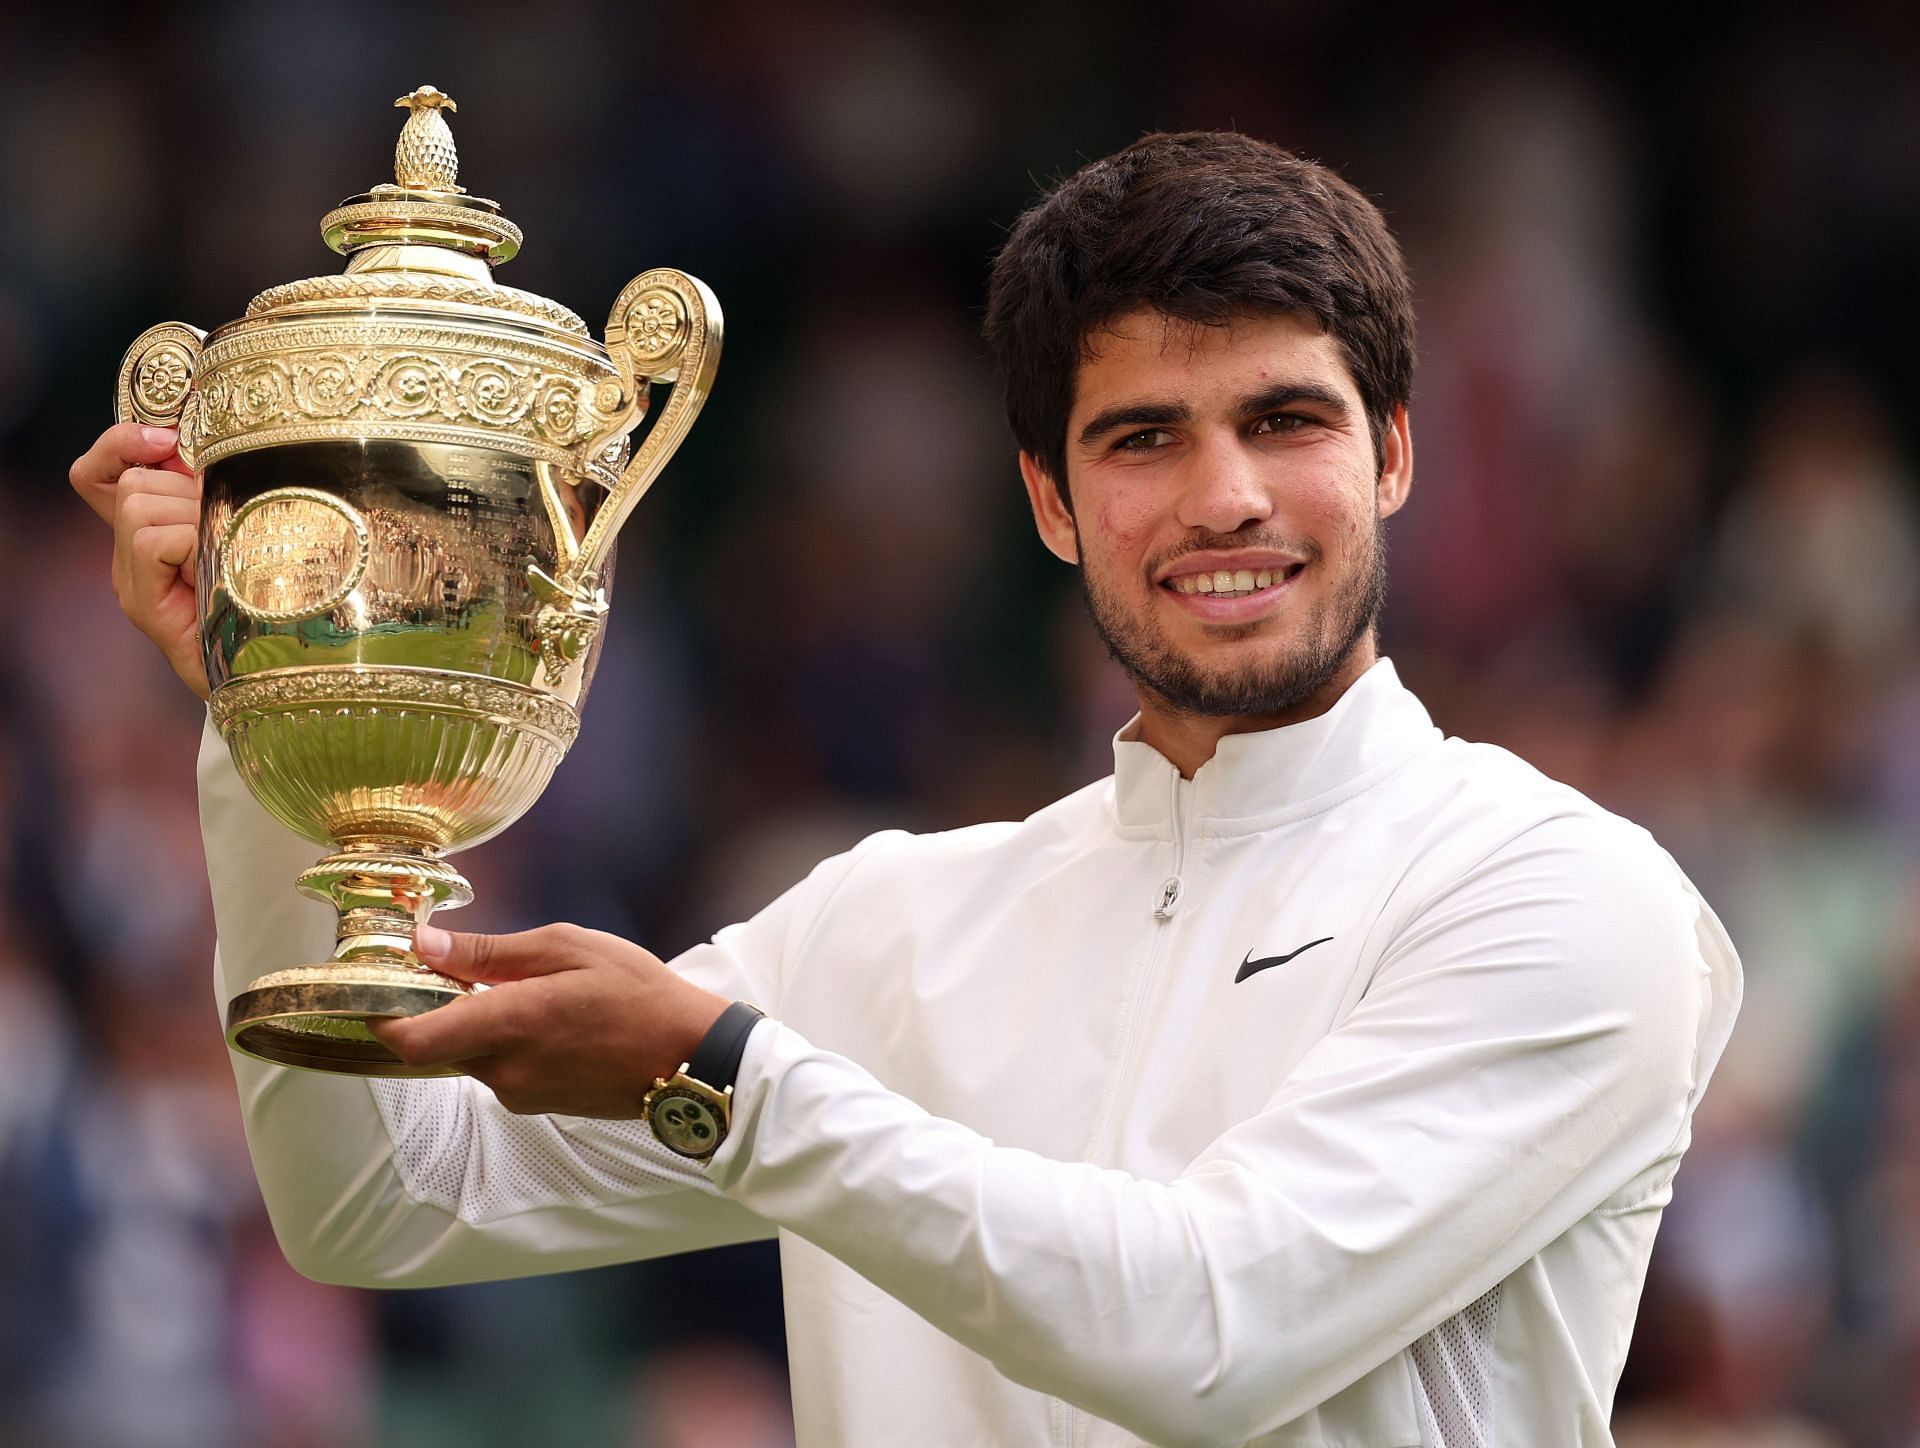 Carlos Alcaraz pictured after winning the 2023 Wimbledon Championships